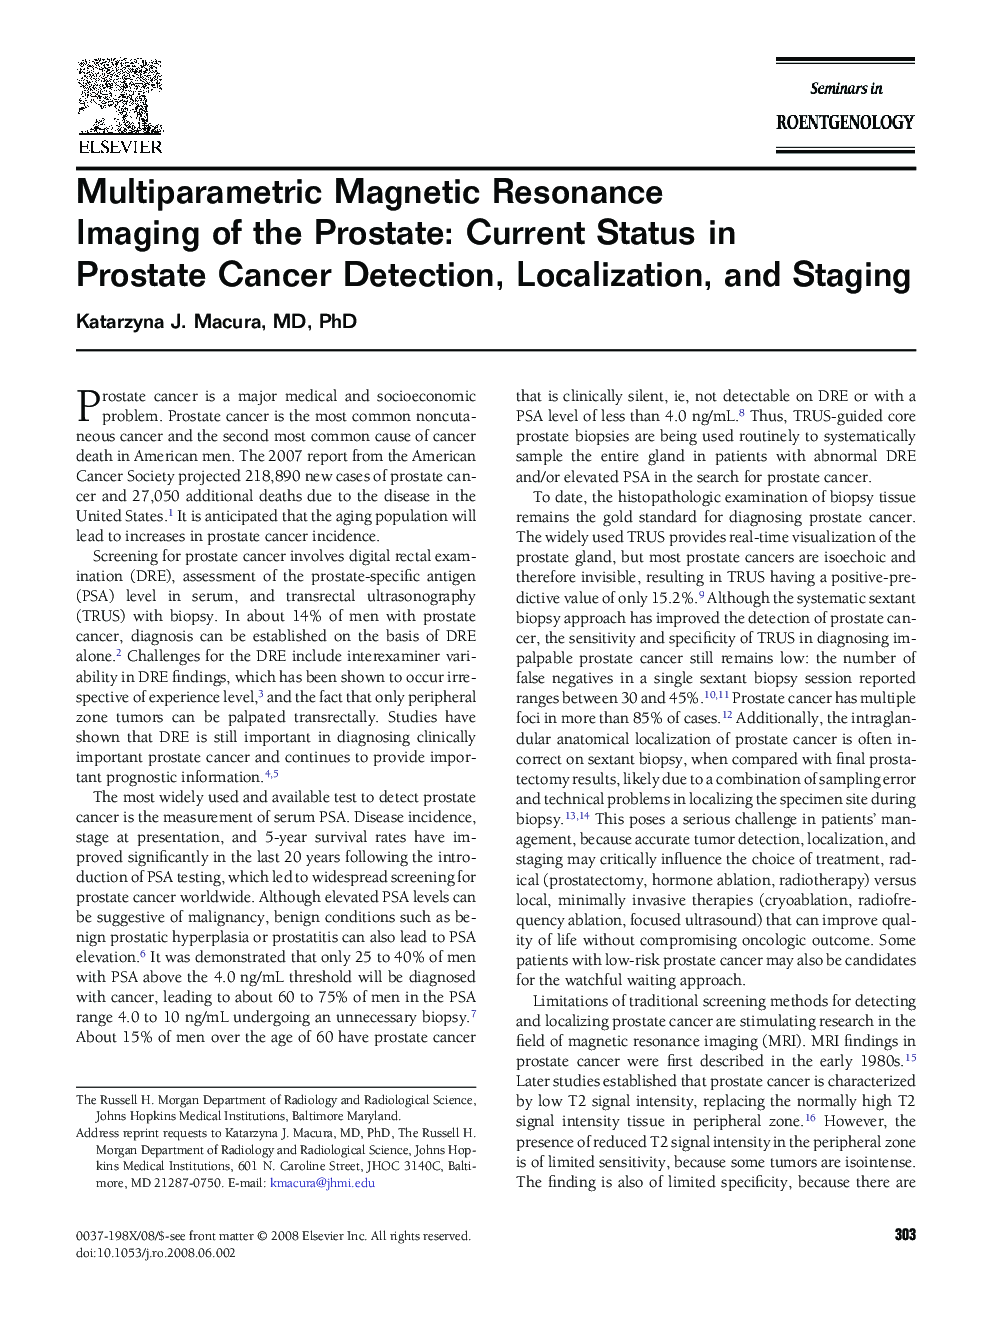 Multiparametric Magnetic Resonance Imaging of the Prostate: Current Status in Prostate Cancer Detection, Localization, and Staging